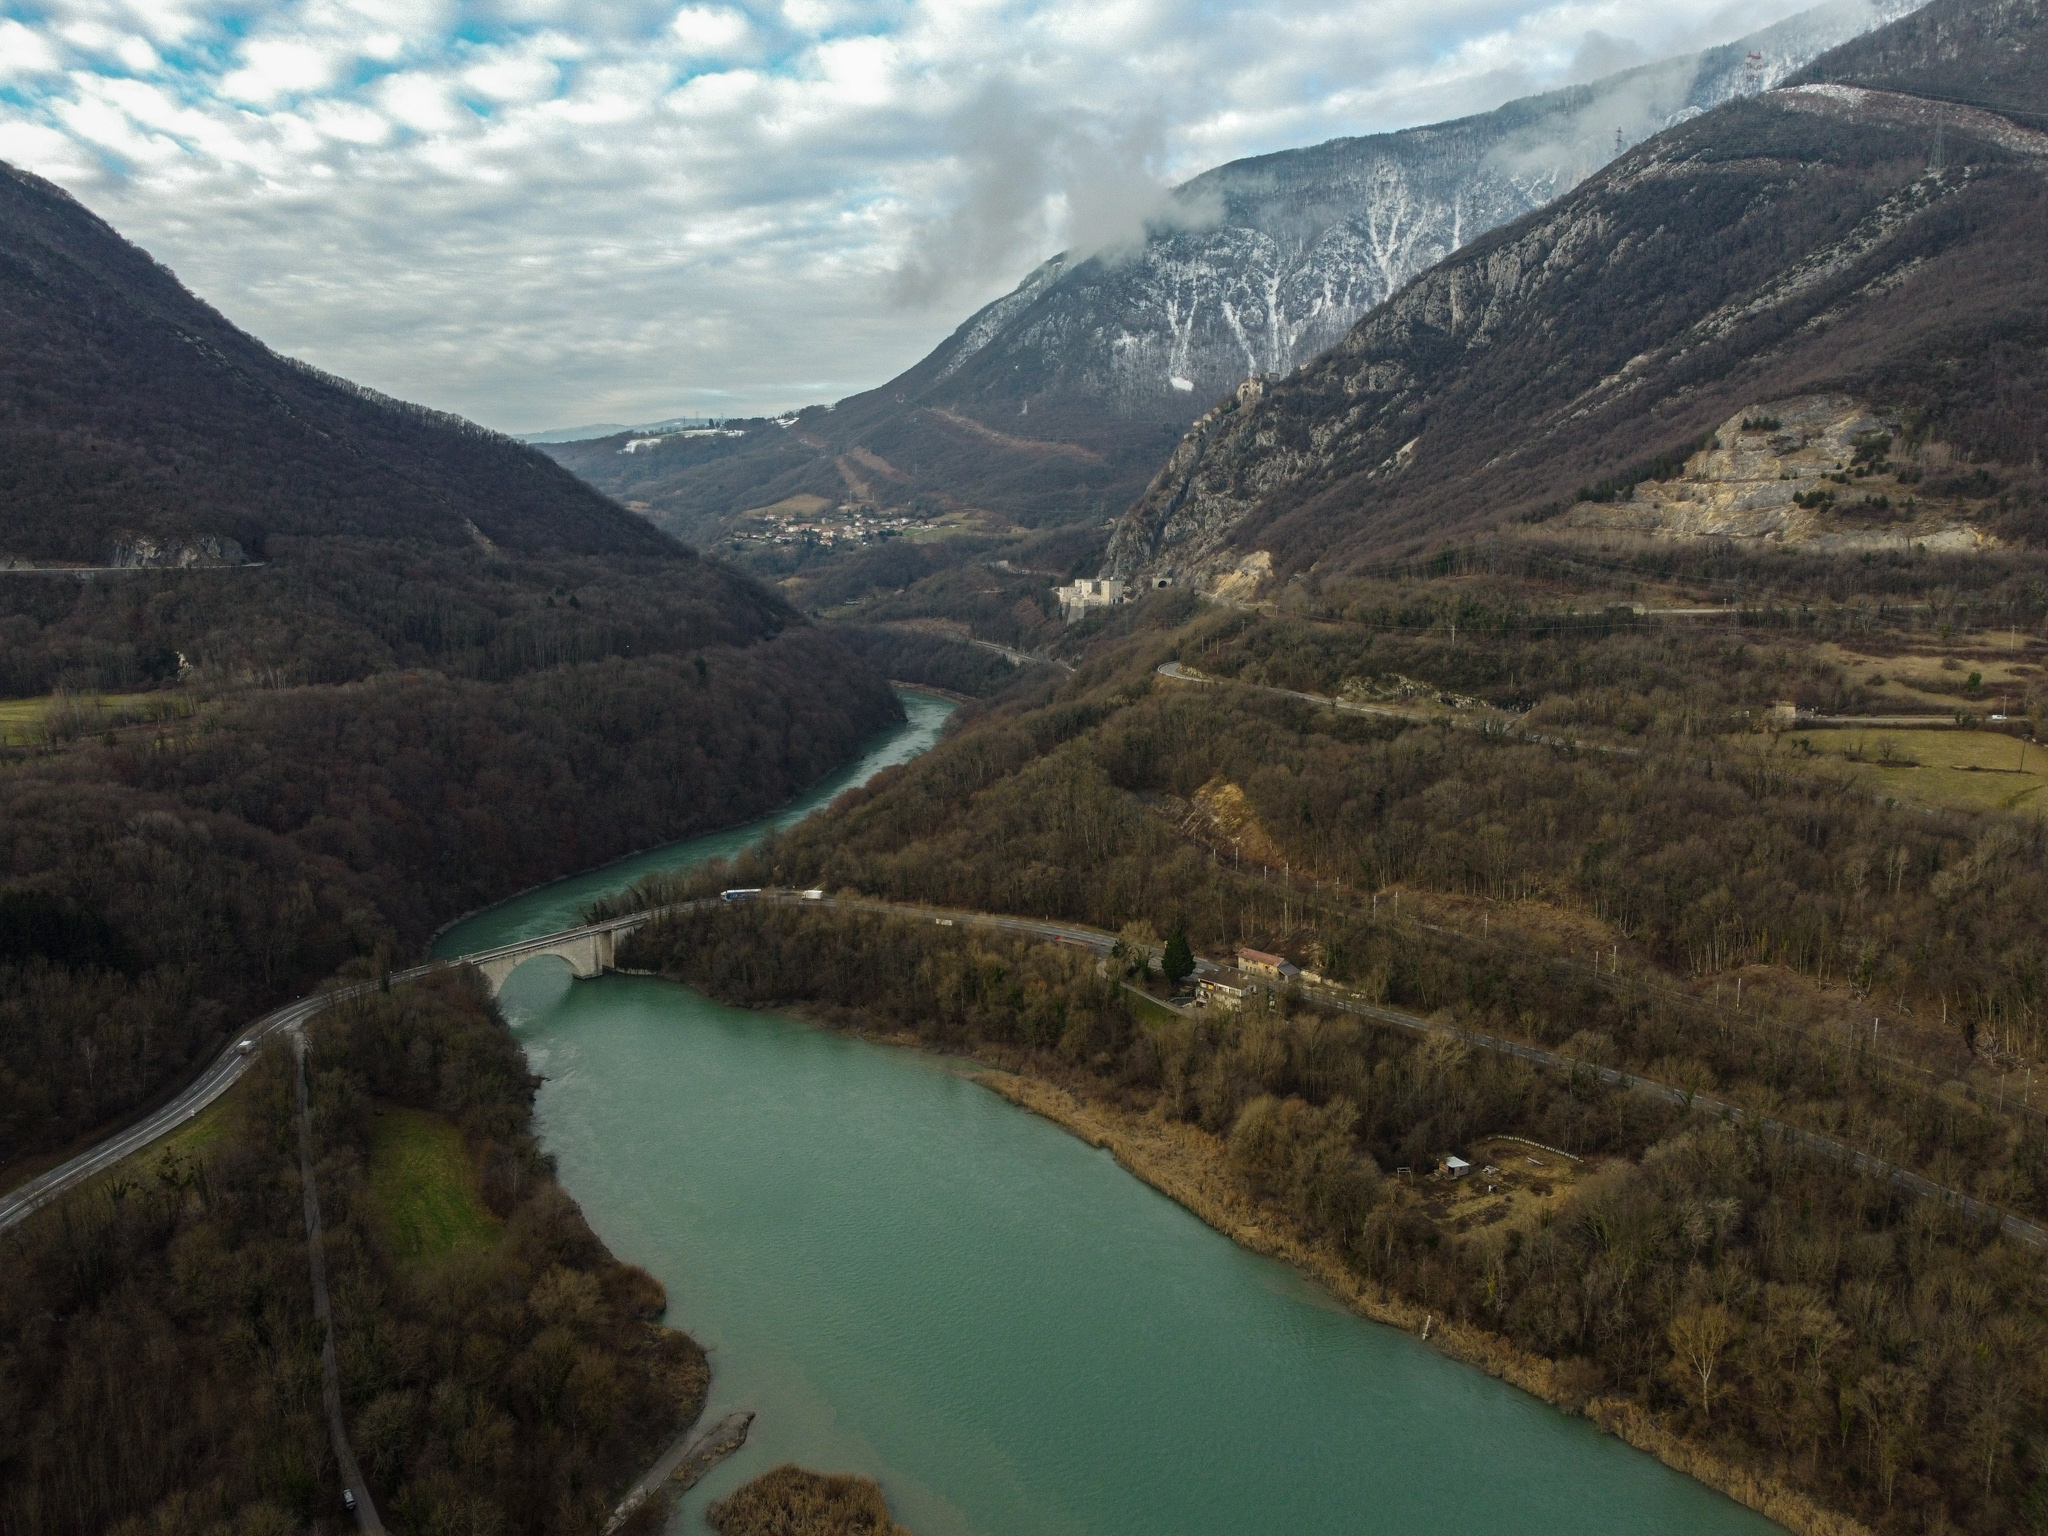 General 2048x1536 photography outdoors landscape nature drone photo mountains trees forest river bridge snow greenery winter France clouds